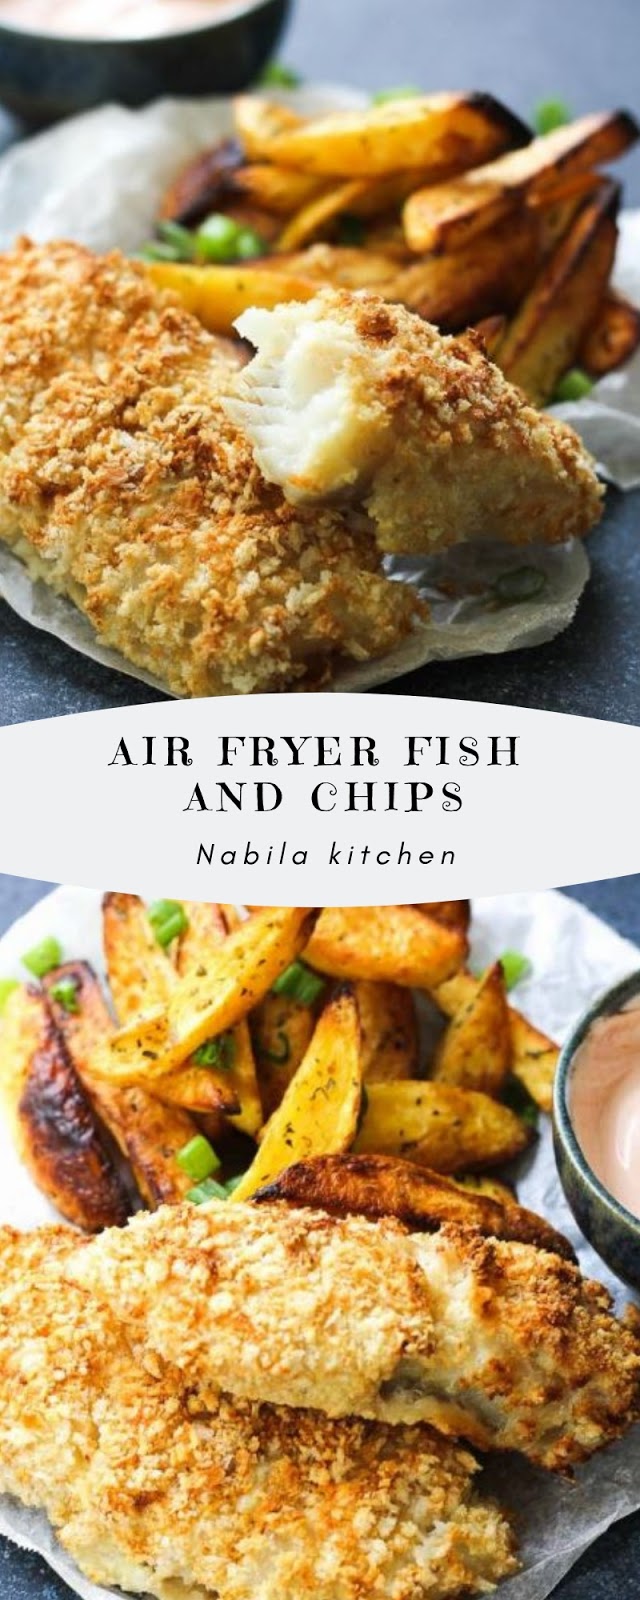 Air fryer fish and chips Recipe